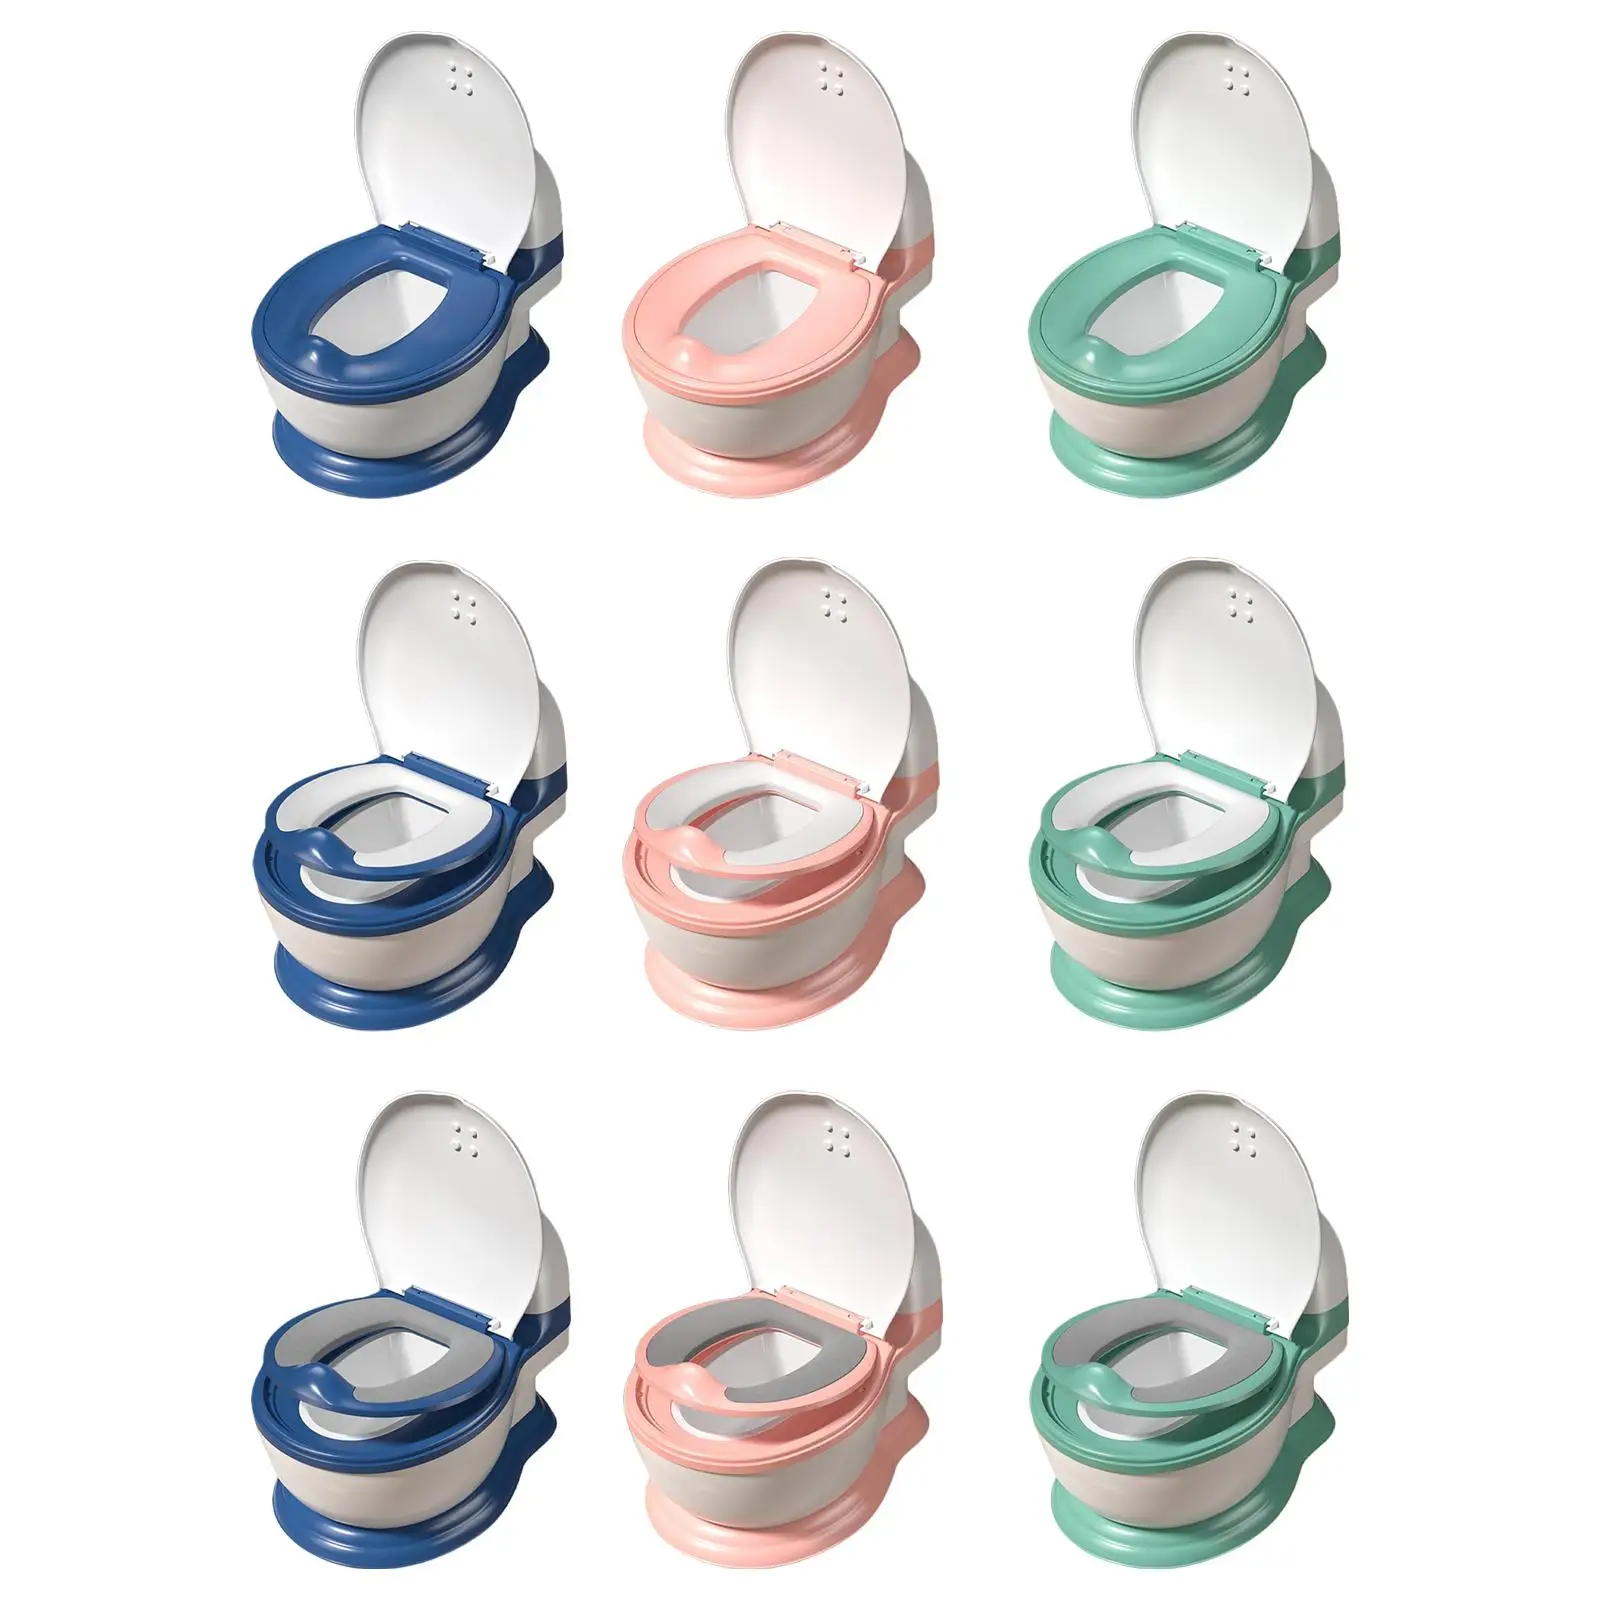 Real Feel Potty Travel Portable with Pad Realistic Potty Seat Potty Train Toilet for Outdoor Hotel Nursery Bedroom Girls